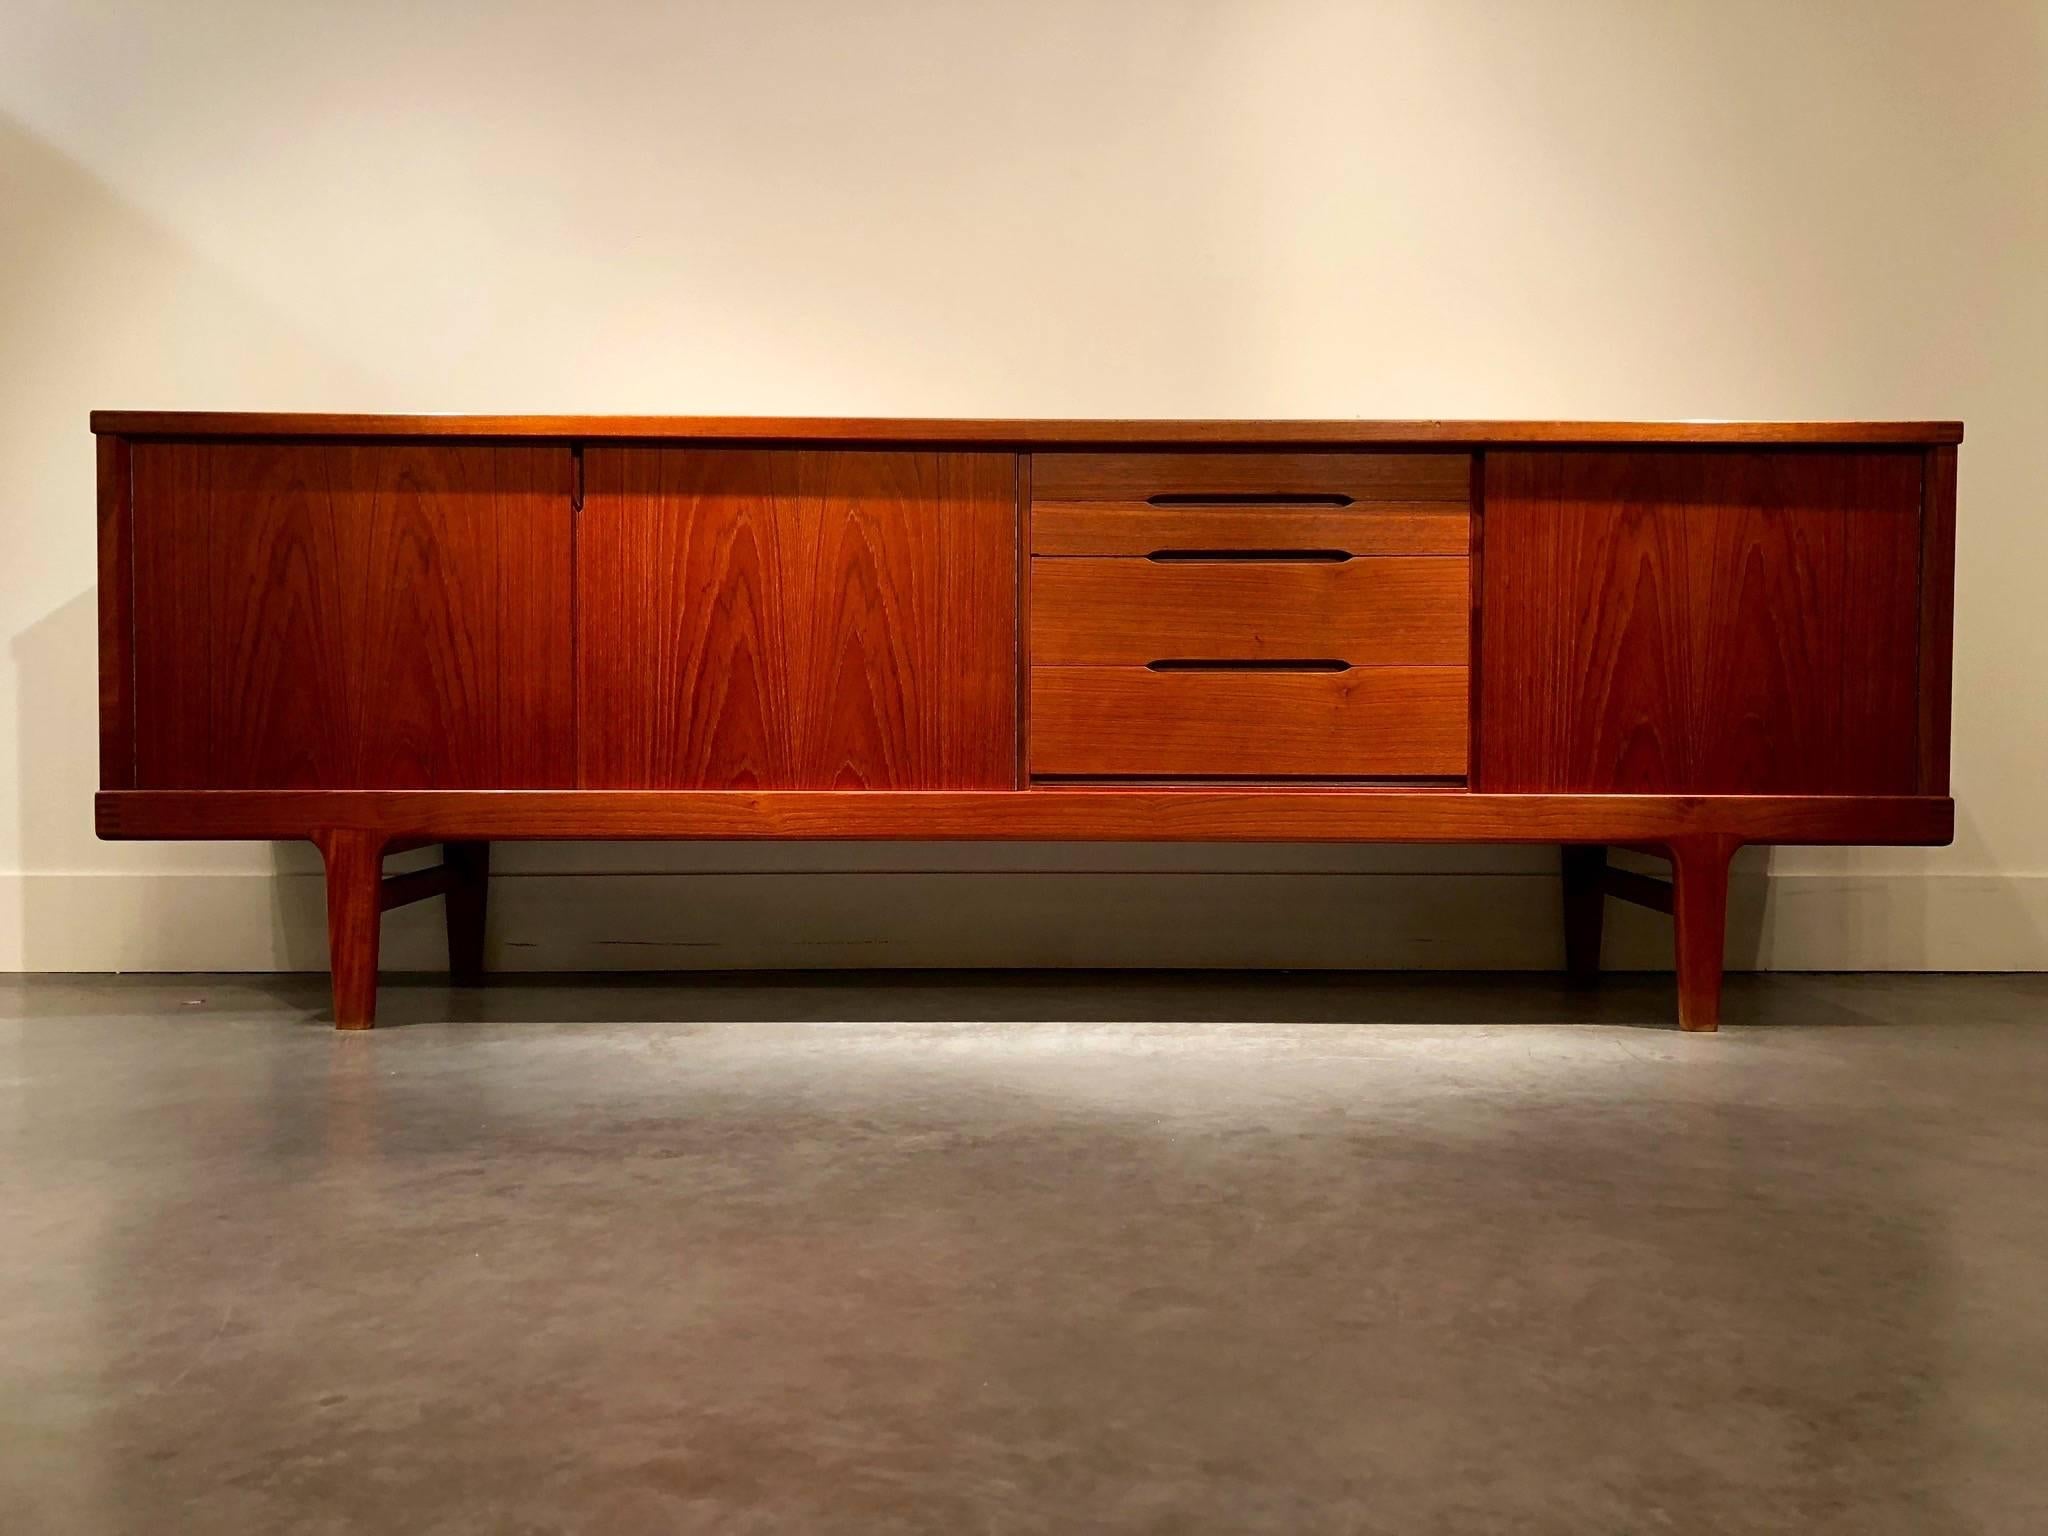 Danish sideboard made of teak with four drawers and three doors.
High quality furniture with dovetail joint at each corner.
Good vintage condition.
Stamped: K&S -made in Denmark on the underside.